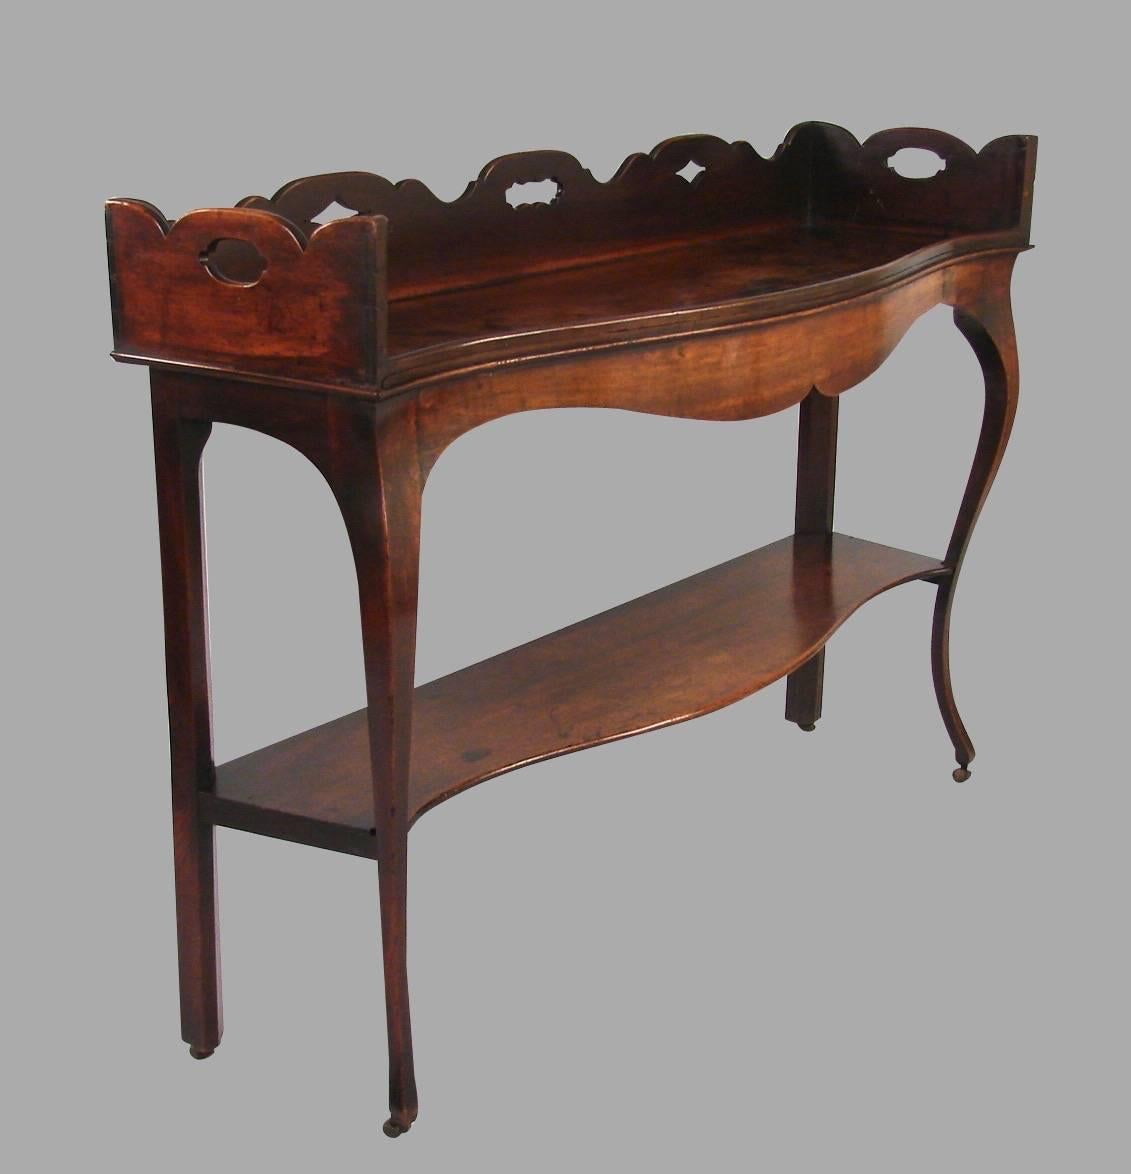 An unusual George III period server in the Hepplewhite taste, the serpentine top with a pierced surround above a molded edge with a shaped apron above a single shelf supported on front cabriole legs ending in original casters, circa 1790.